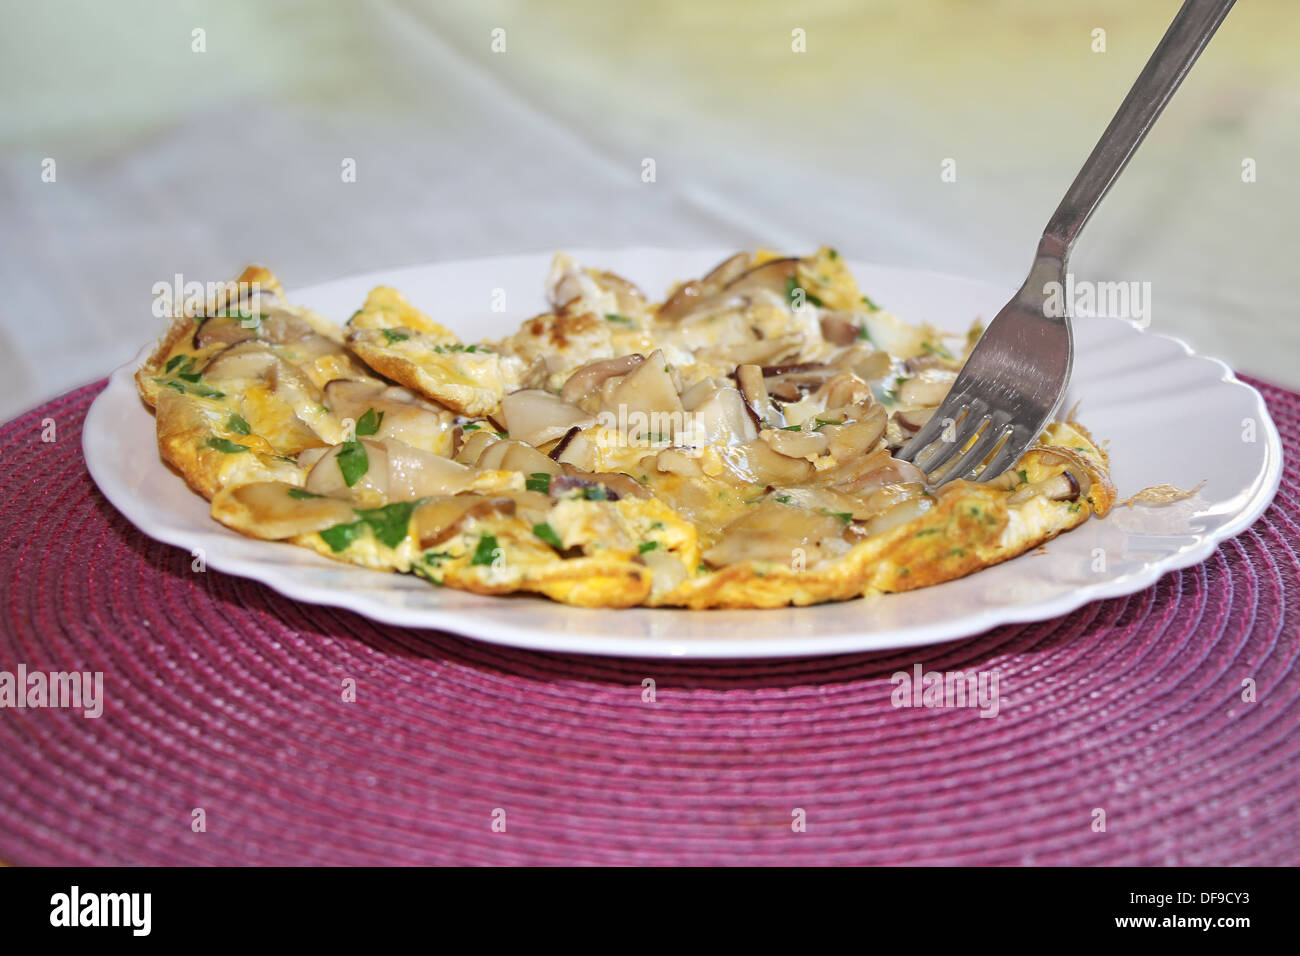 Scrambled eggs with mushrooms boletus on the plate Stock Photo